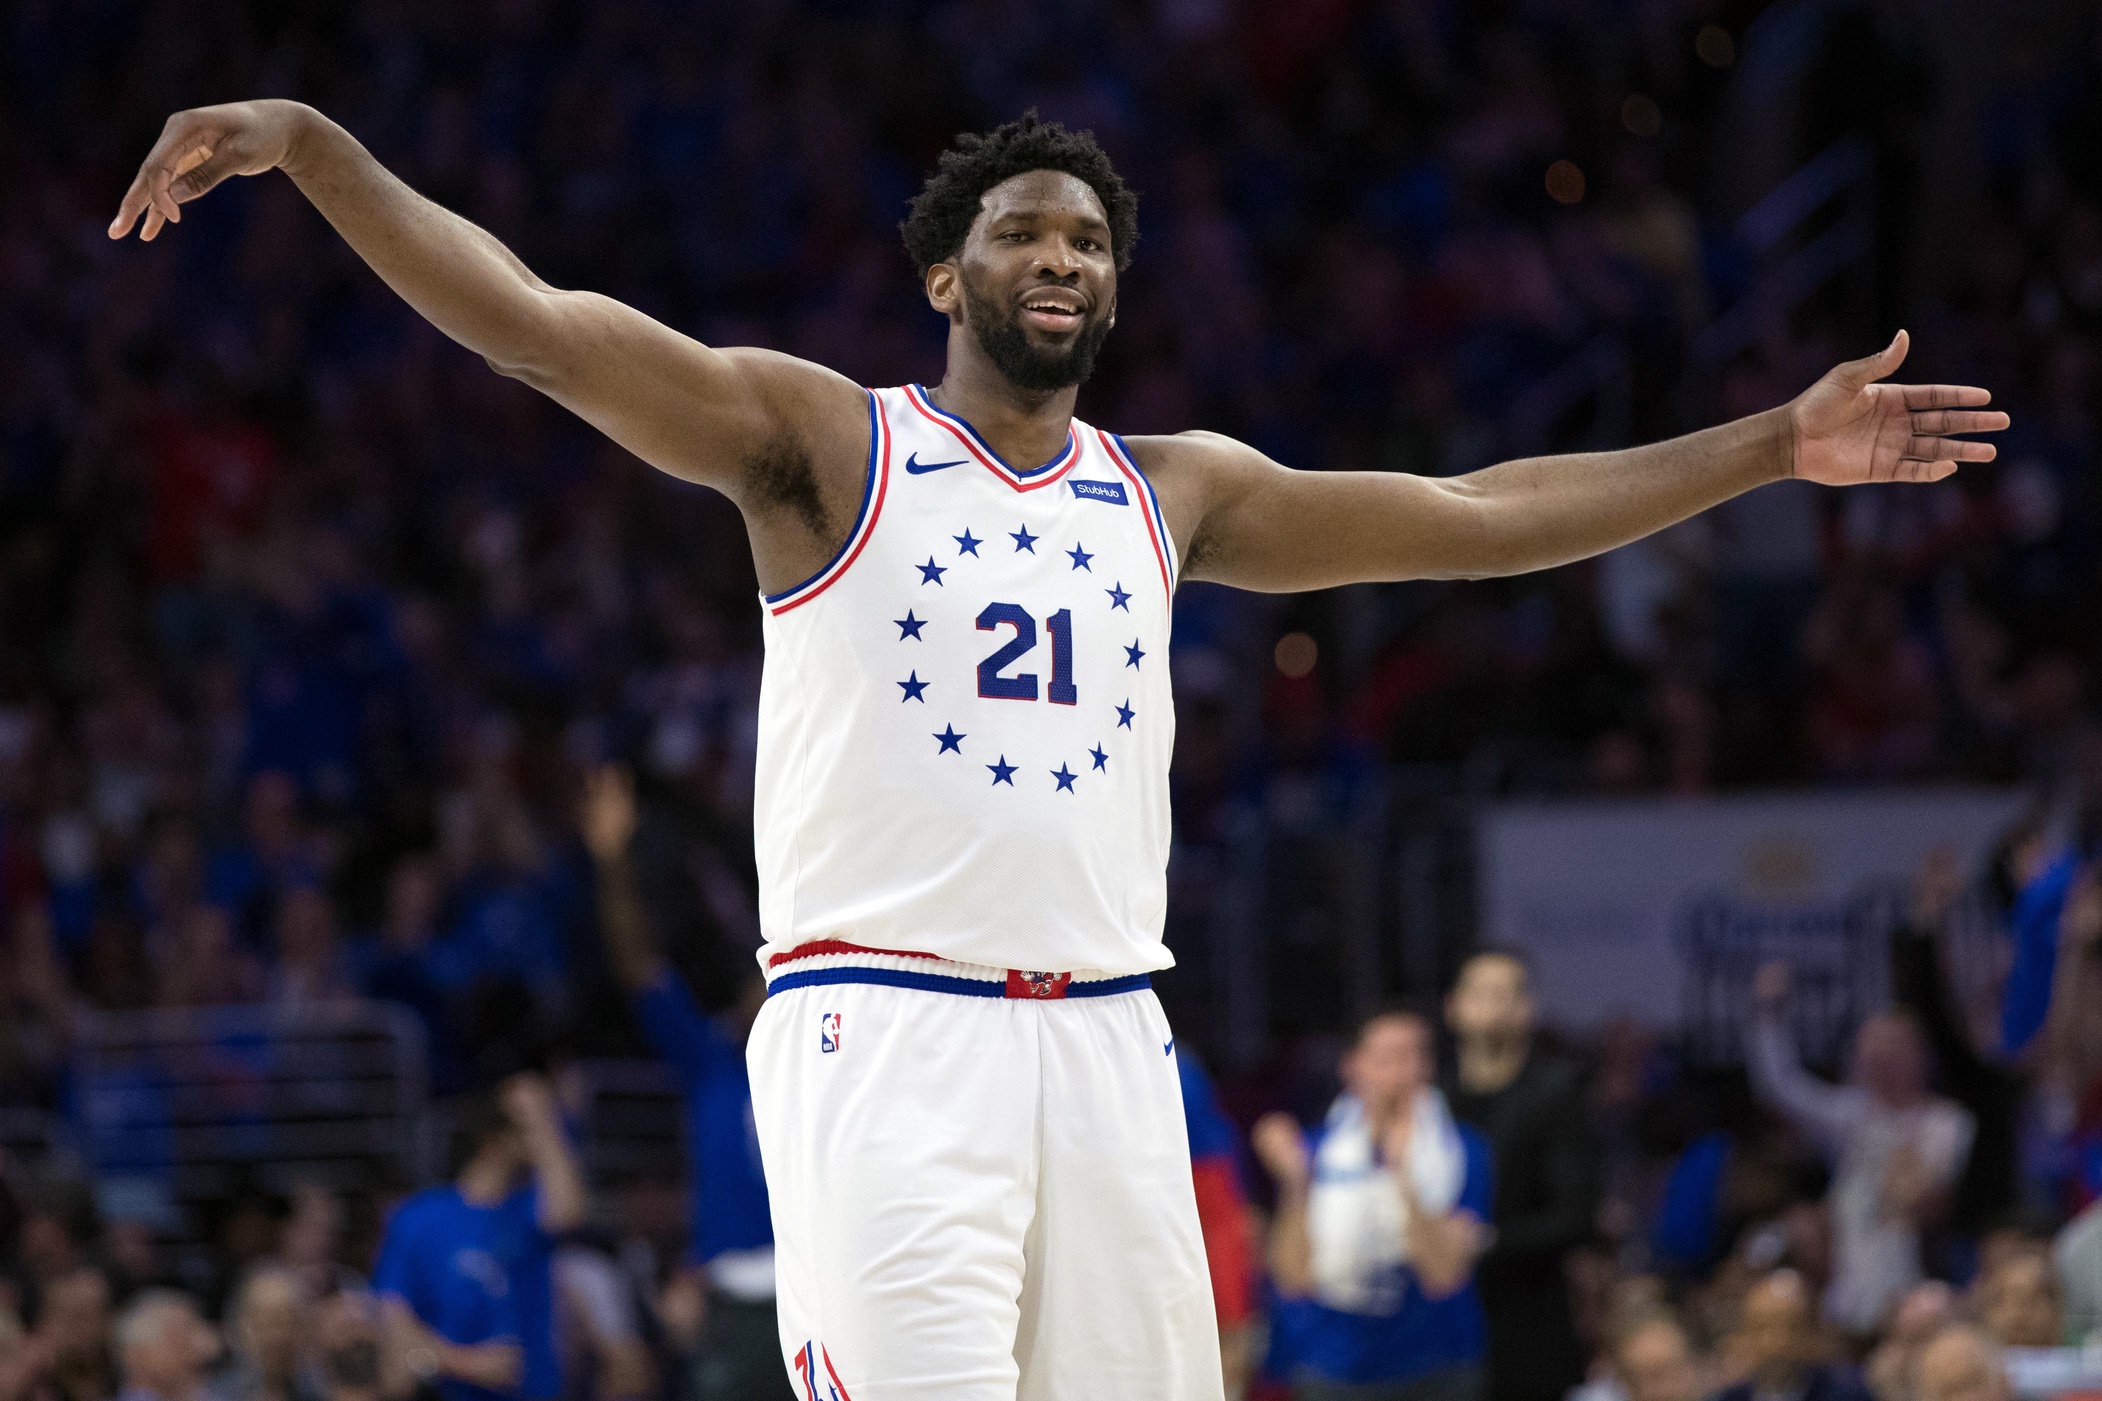 PointsBet Sets The Sixers’ 2019-2020 Win Total at 54.5